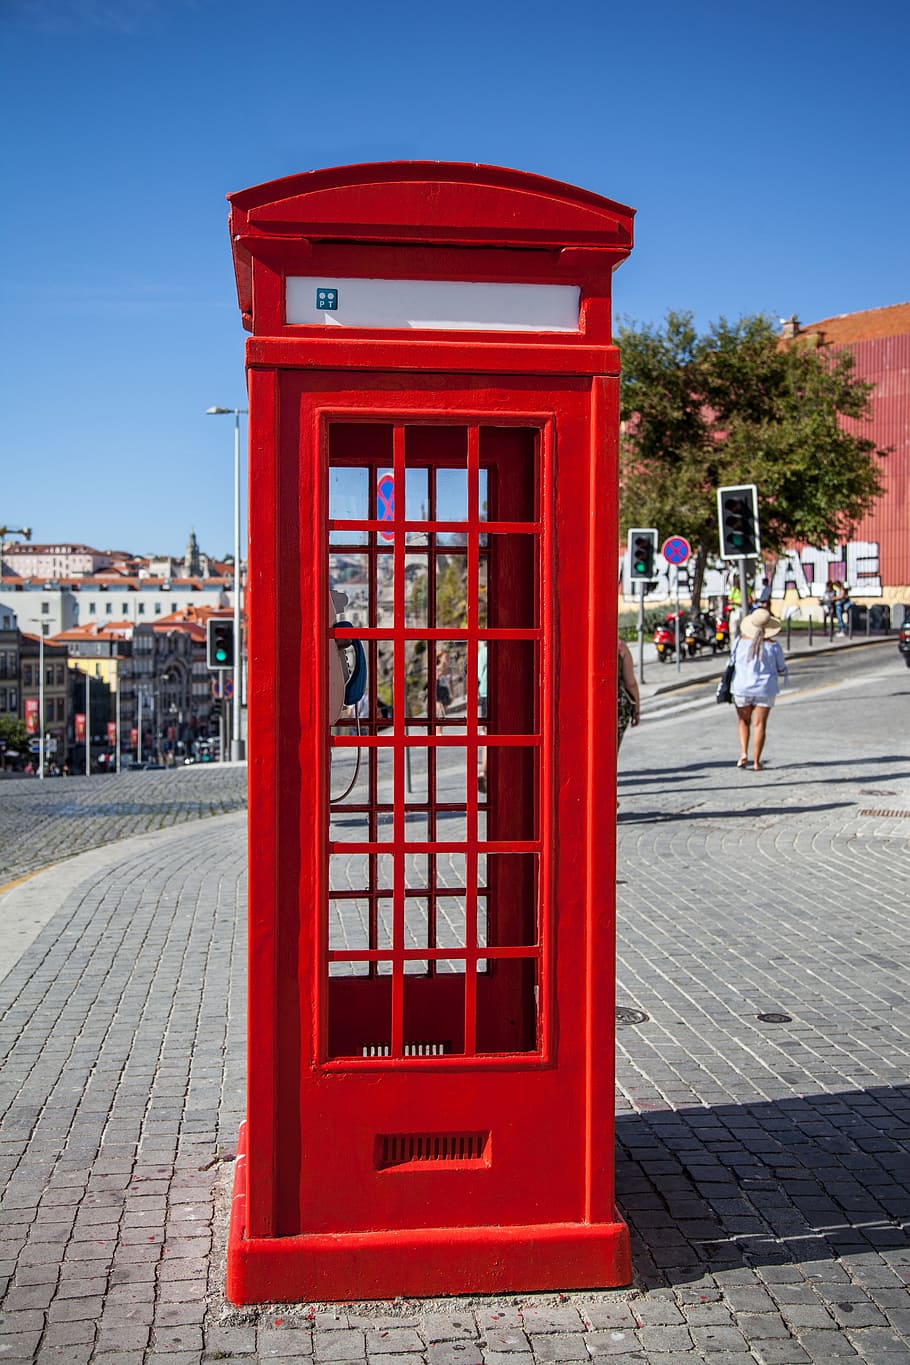 booth, red, blue, air, colorful, telephone, phone booth, telefoonhok, to call, architecture